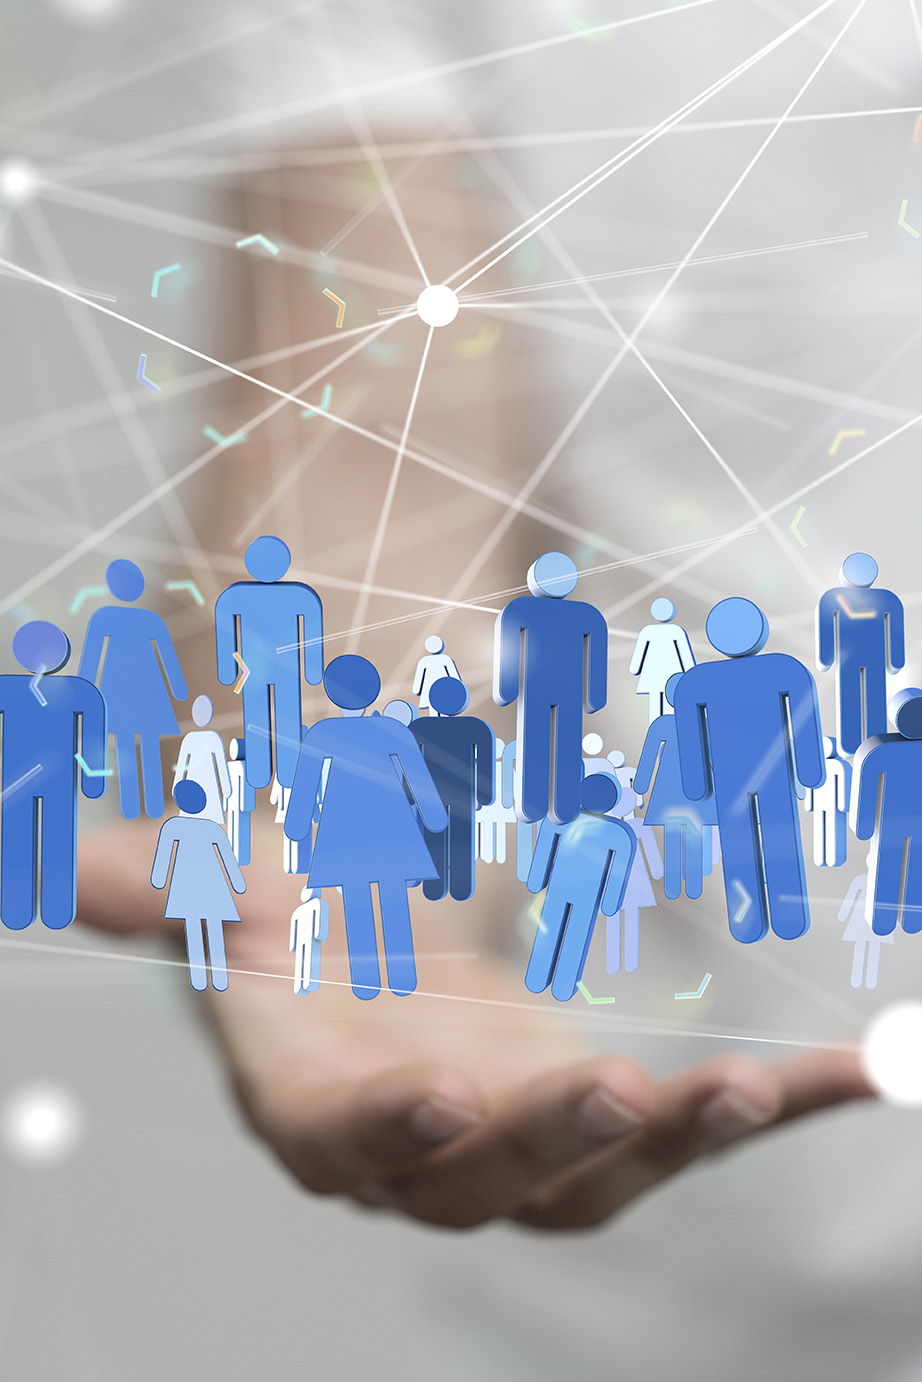 Stock image depicting networking